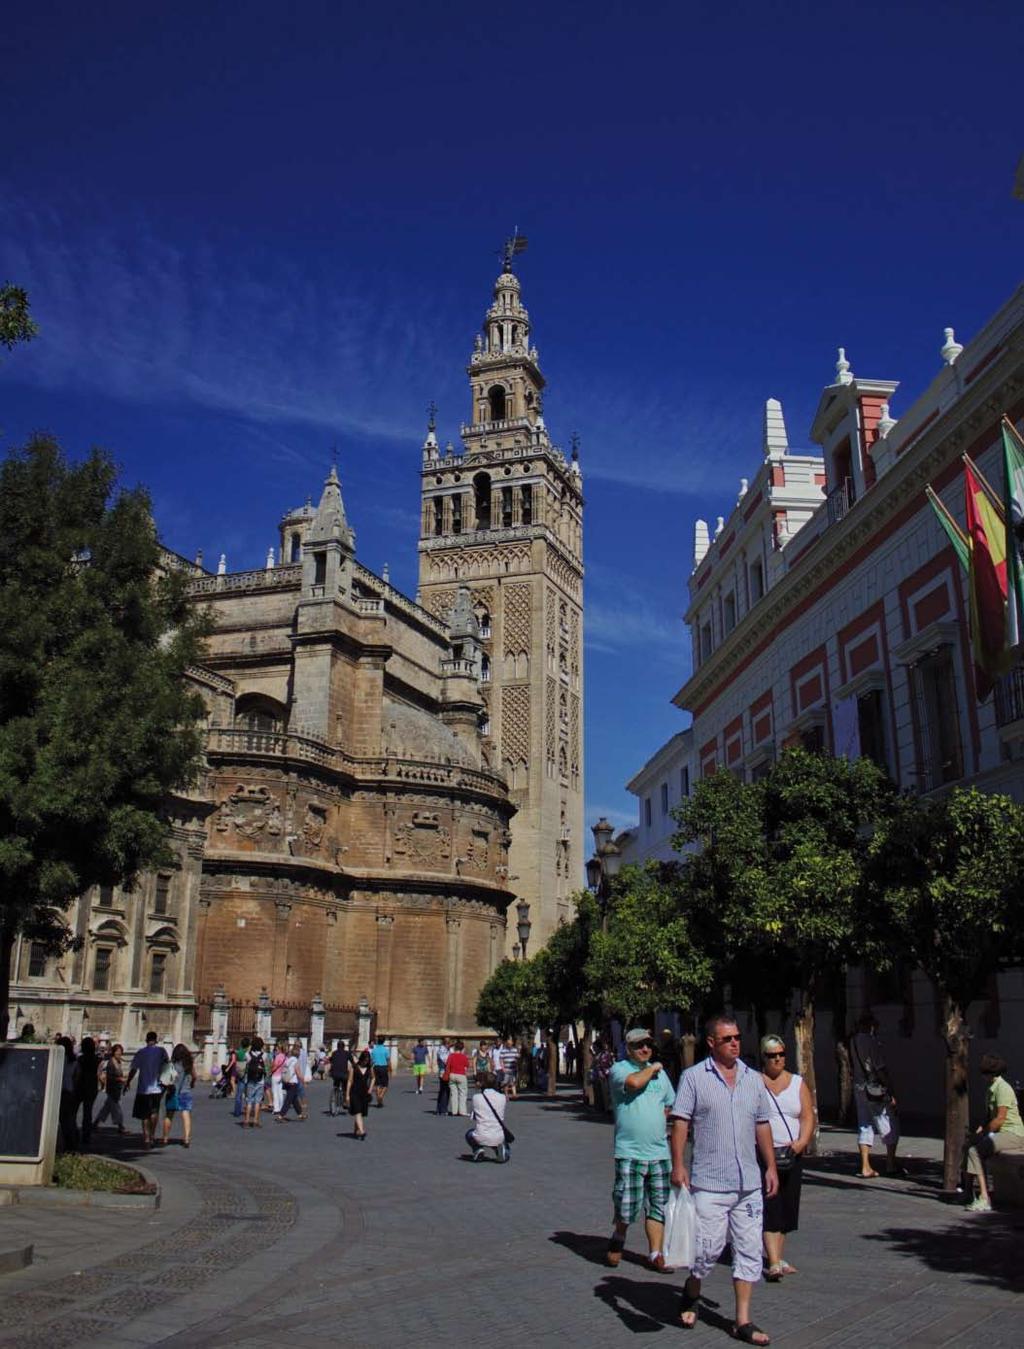 SEVILLE A space for creative businesses Sacred Art Industrial Park SEVILLE [SPAIN] Seville Cathedral The local context The southern Spanish city of Seville is the capital city of Andalusia and has a